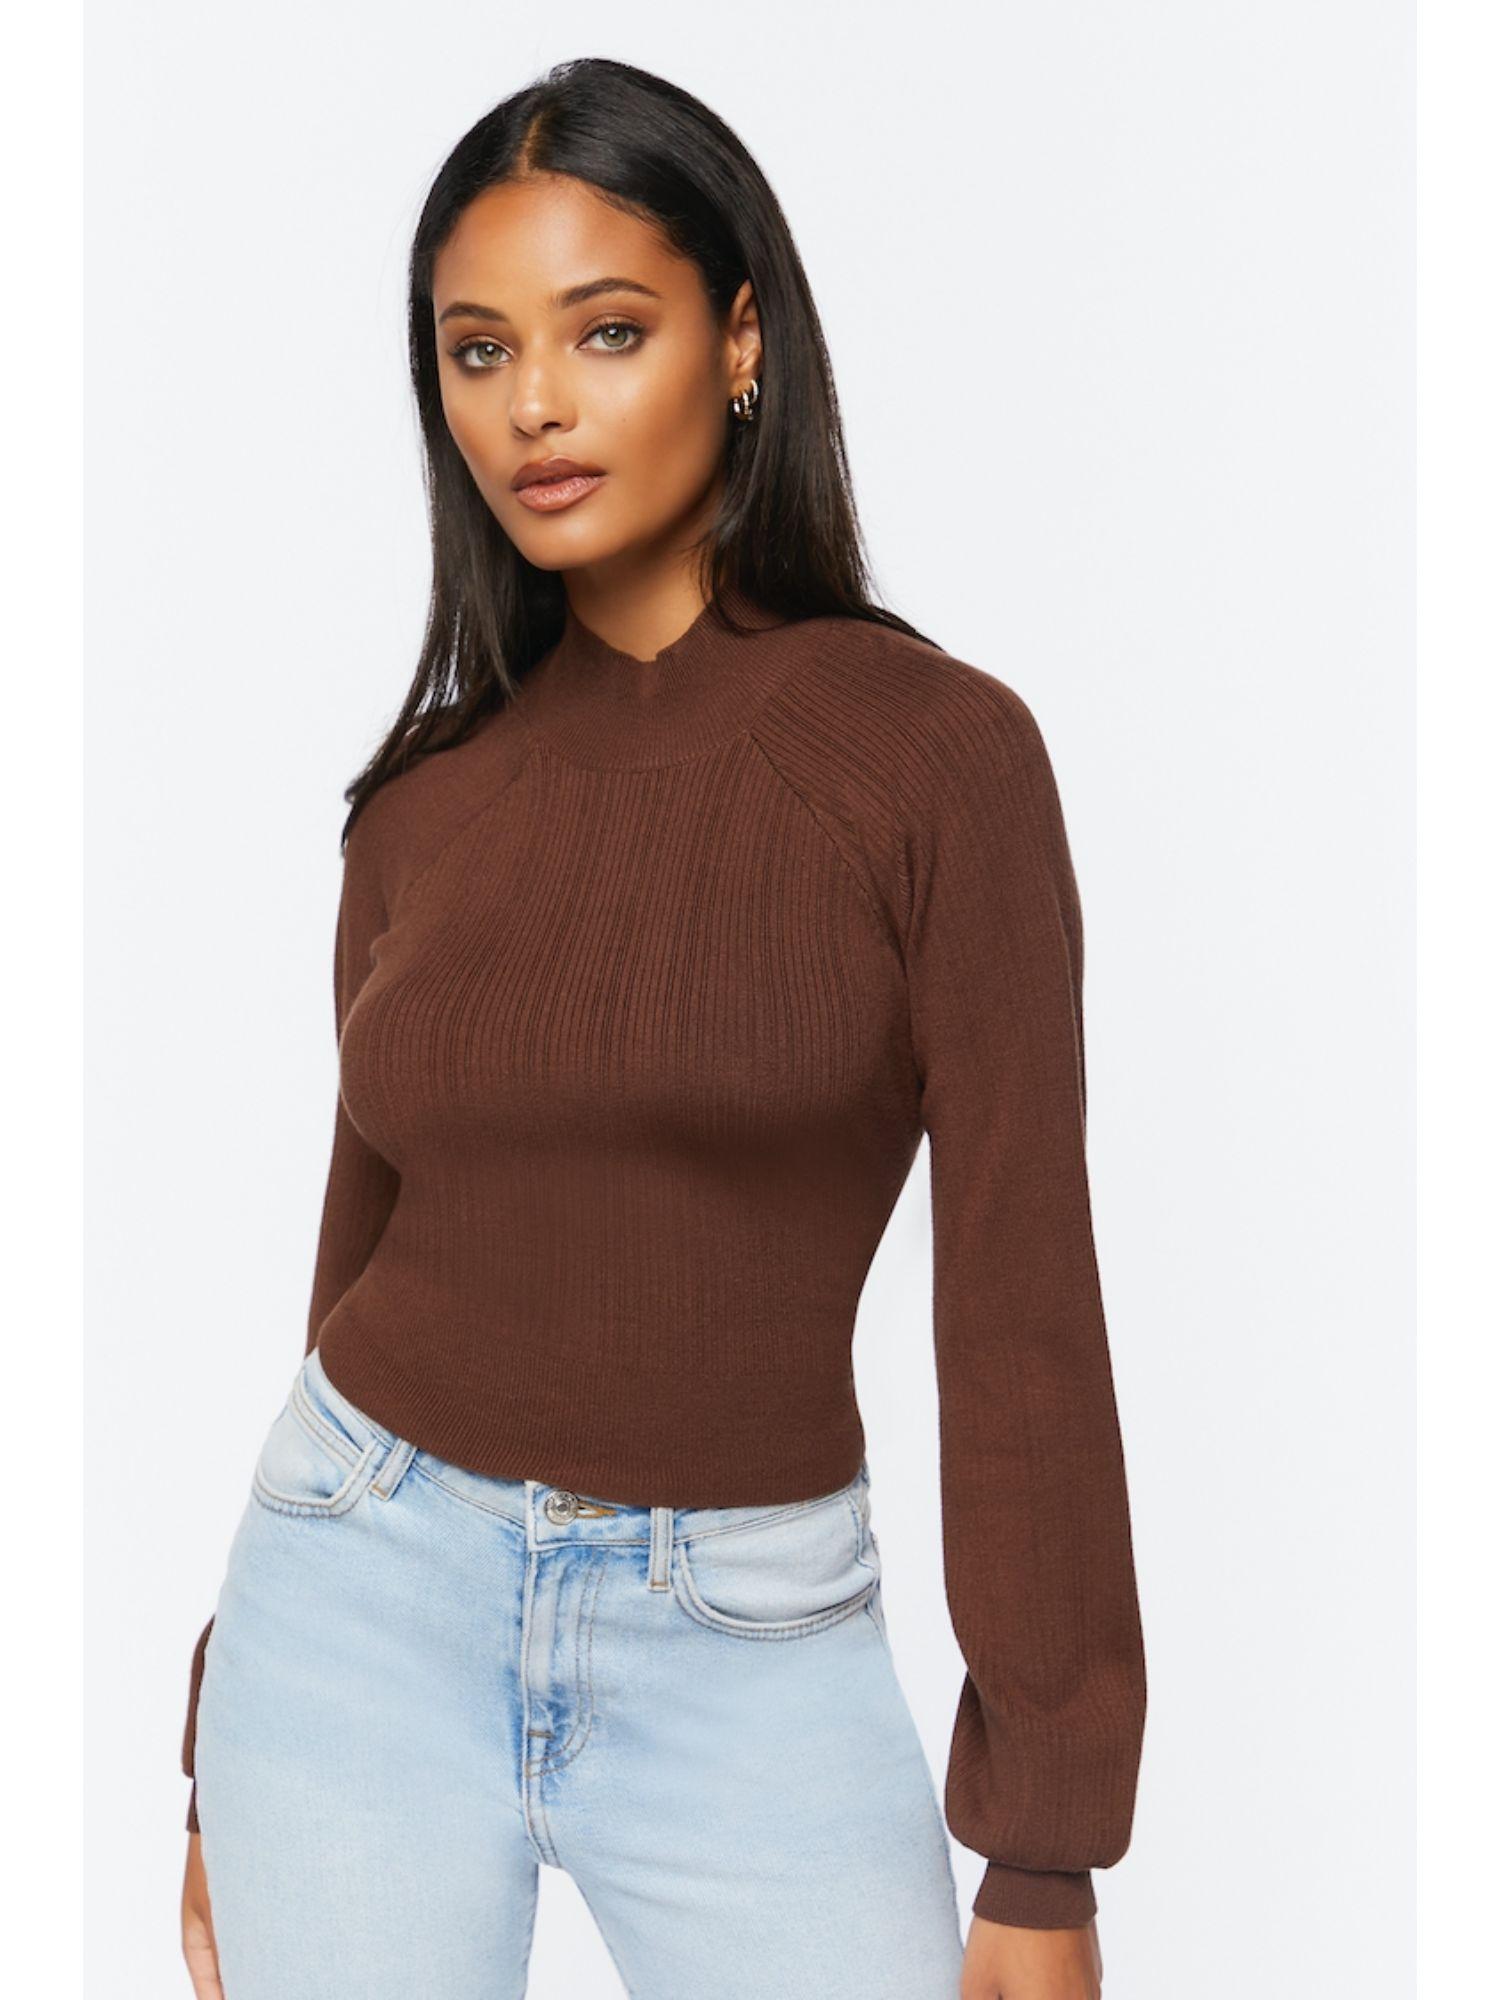 brown textured sweaters